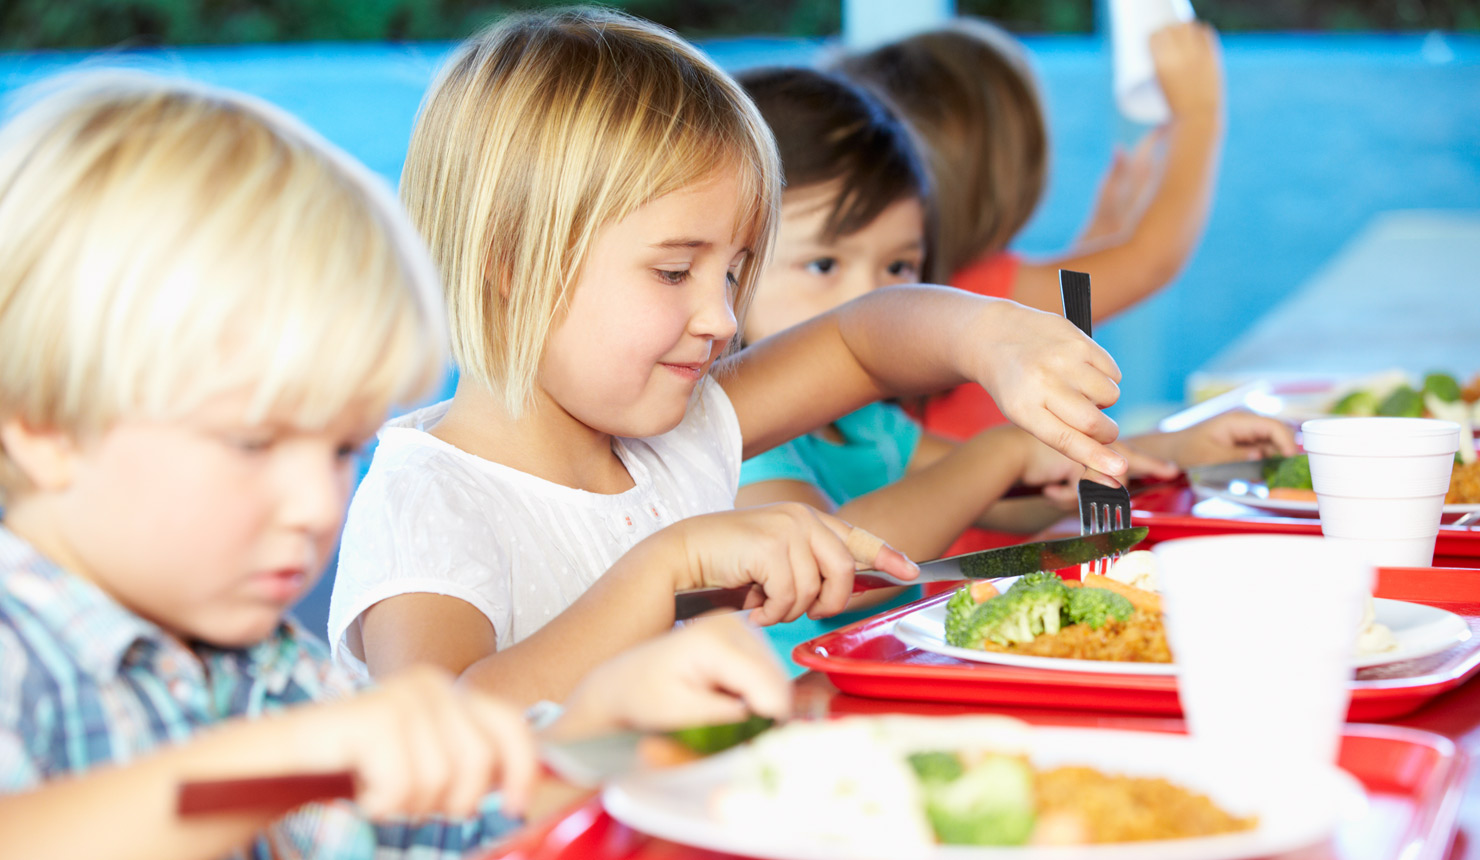 Low Income Kids Eat More Fruits and Vegetables When They are in School